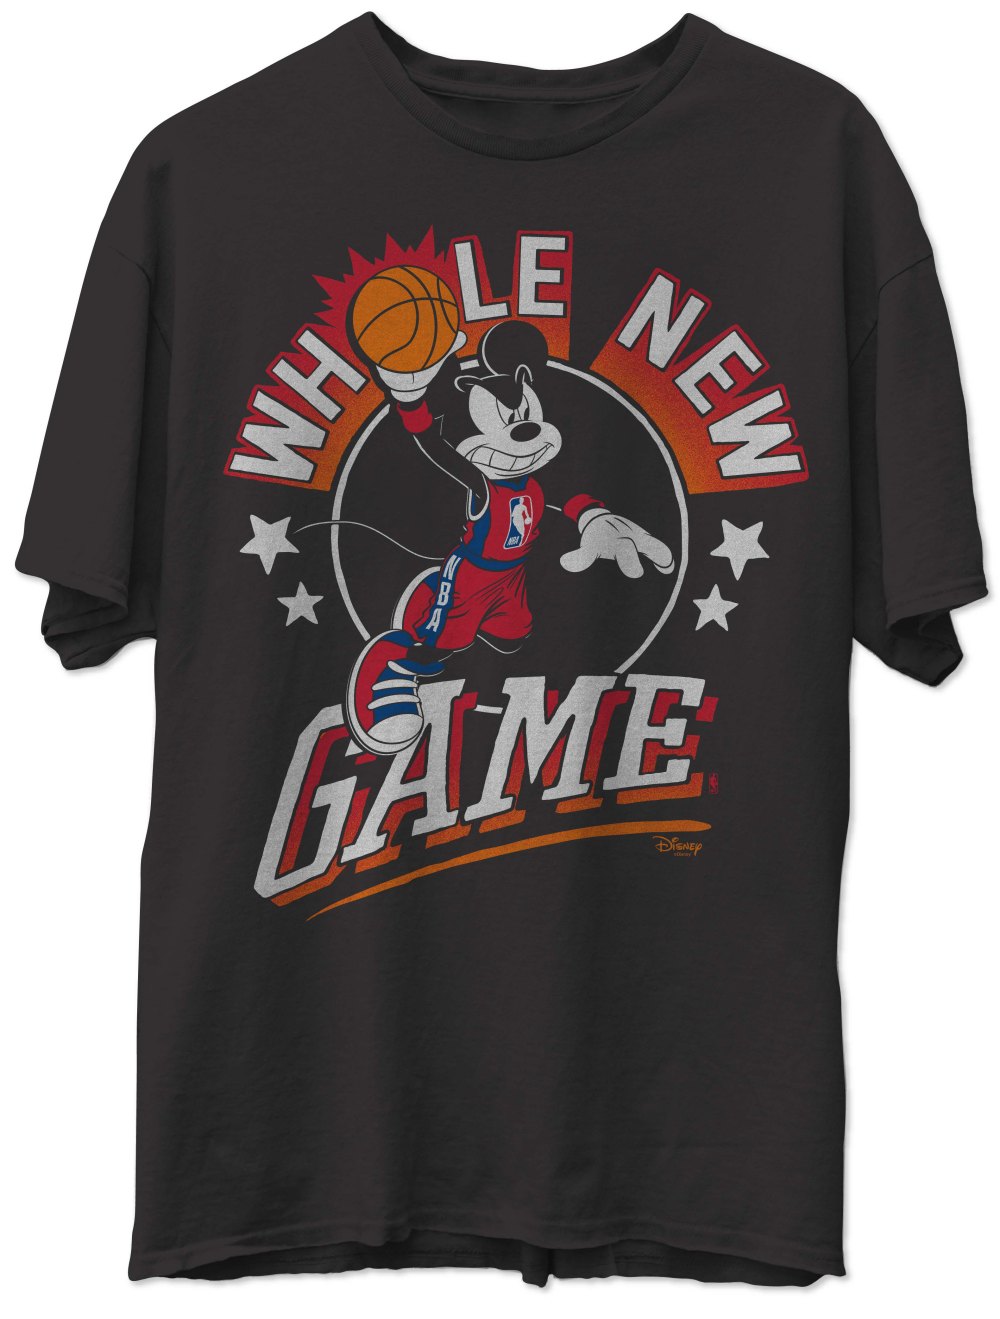 Disney and Junk Food Release Cute Limited-Edition T-Shirts to Celebrate NBA Season Restart